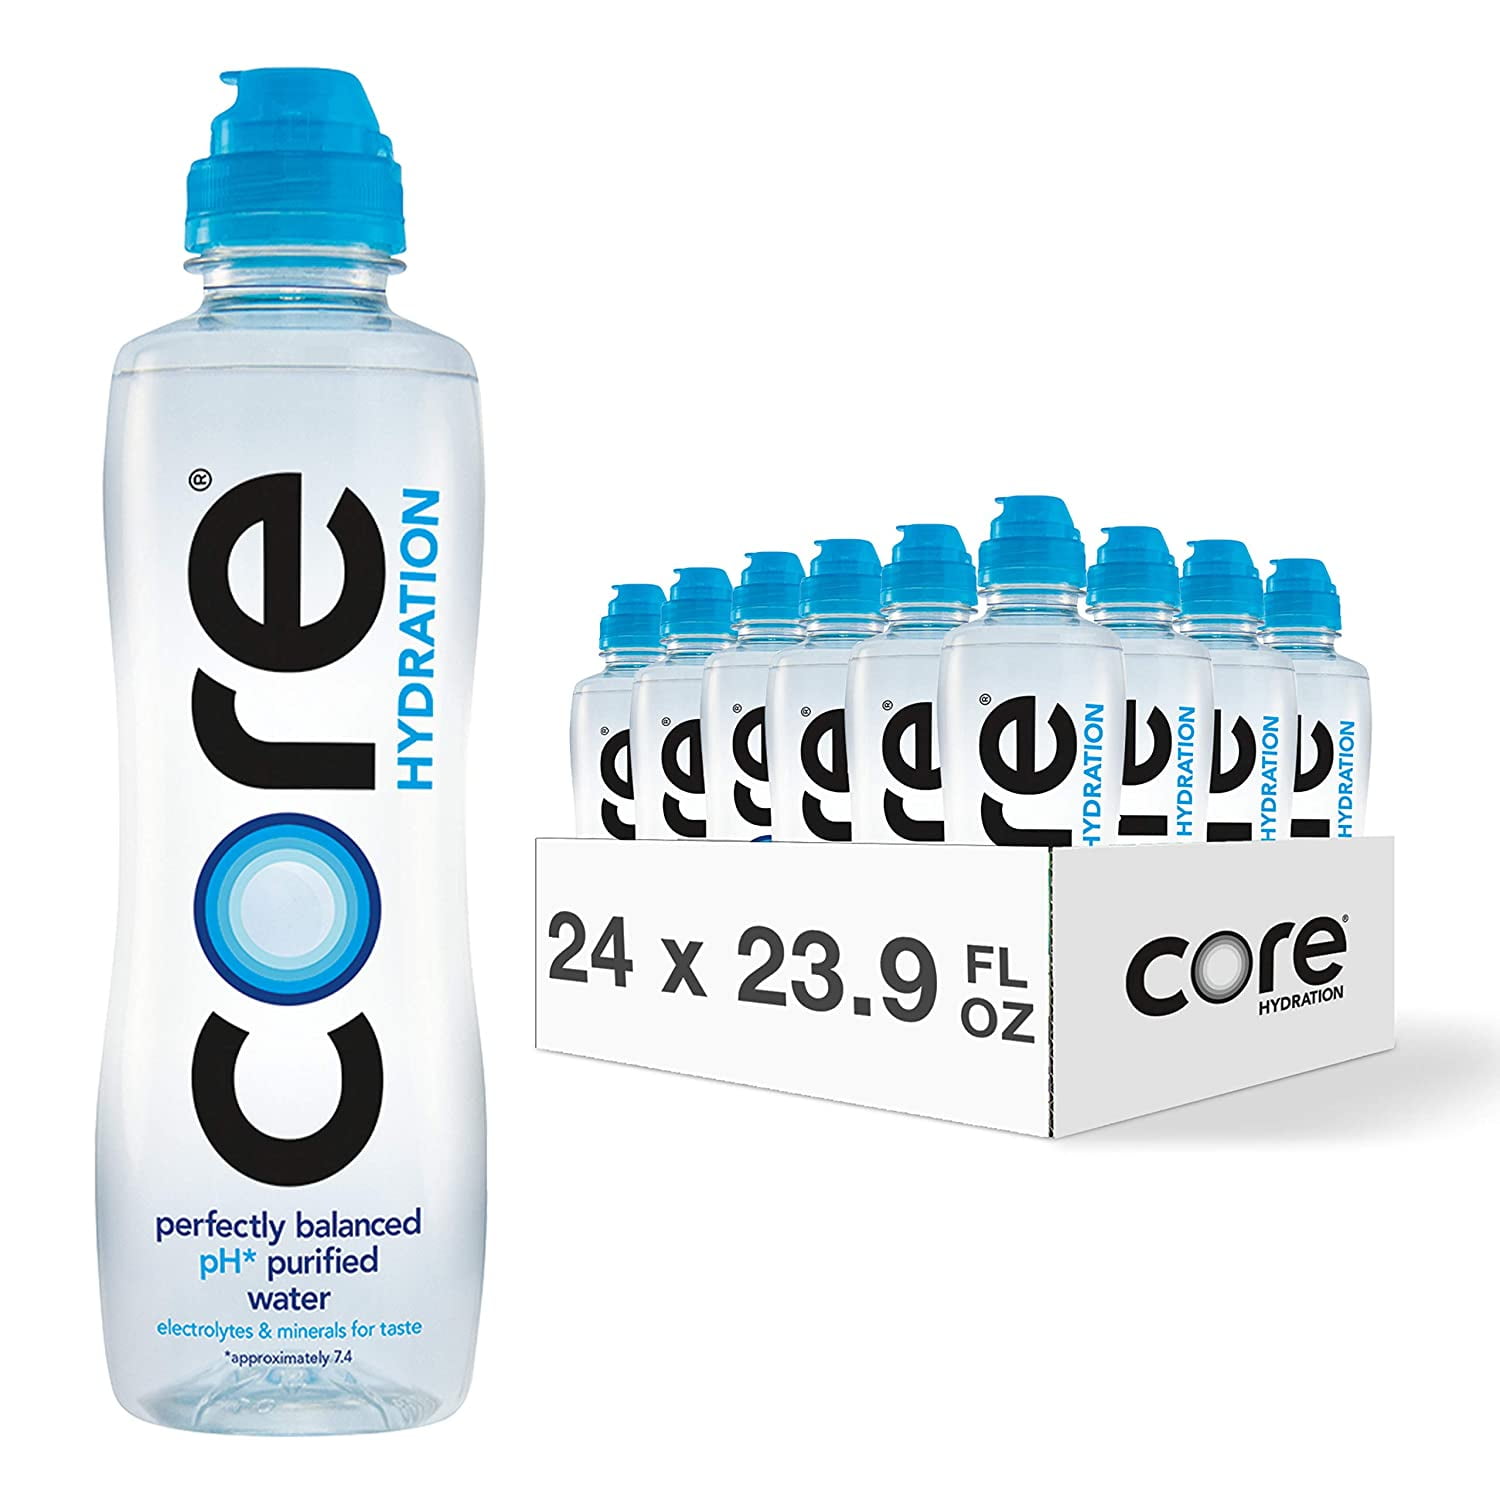  Core Hydration Perfect 7.4 pH Water with electrolytes and  minerals, 16.9 fl.oz (Pack of 8) : Grocery & Gourmet Food